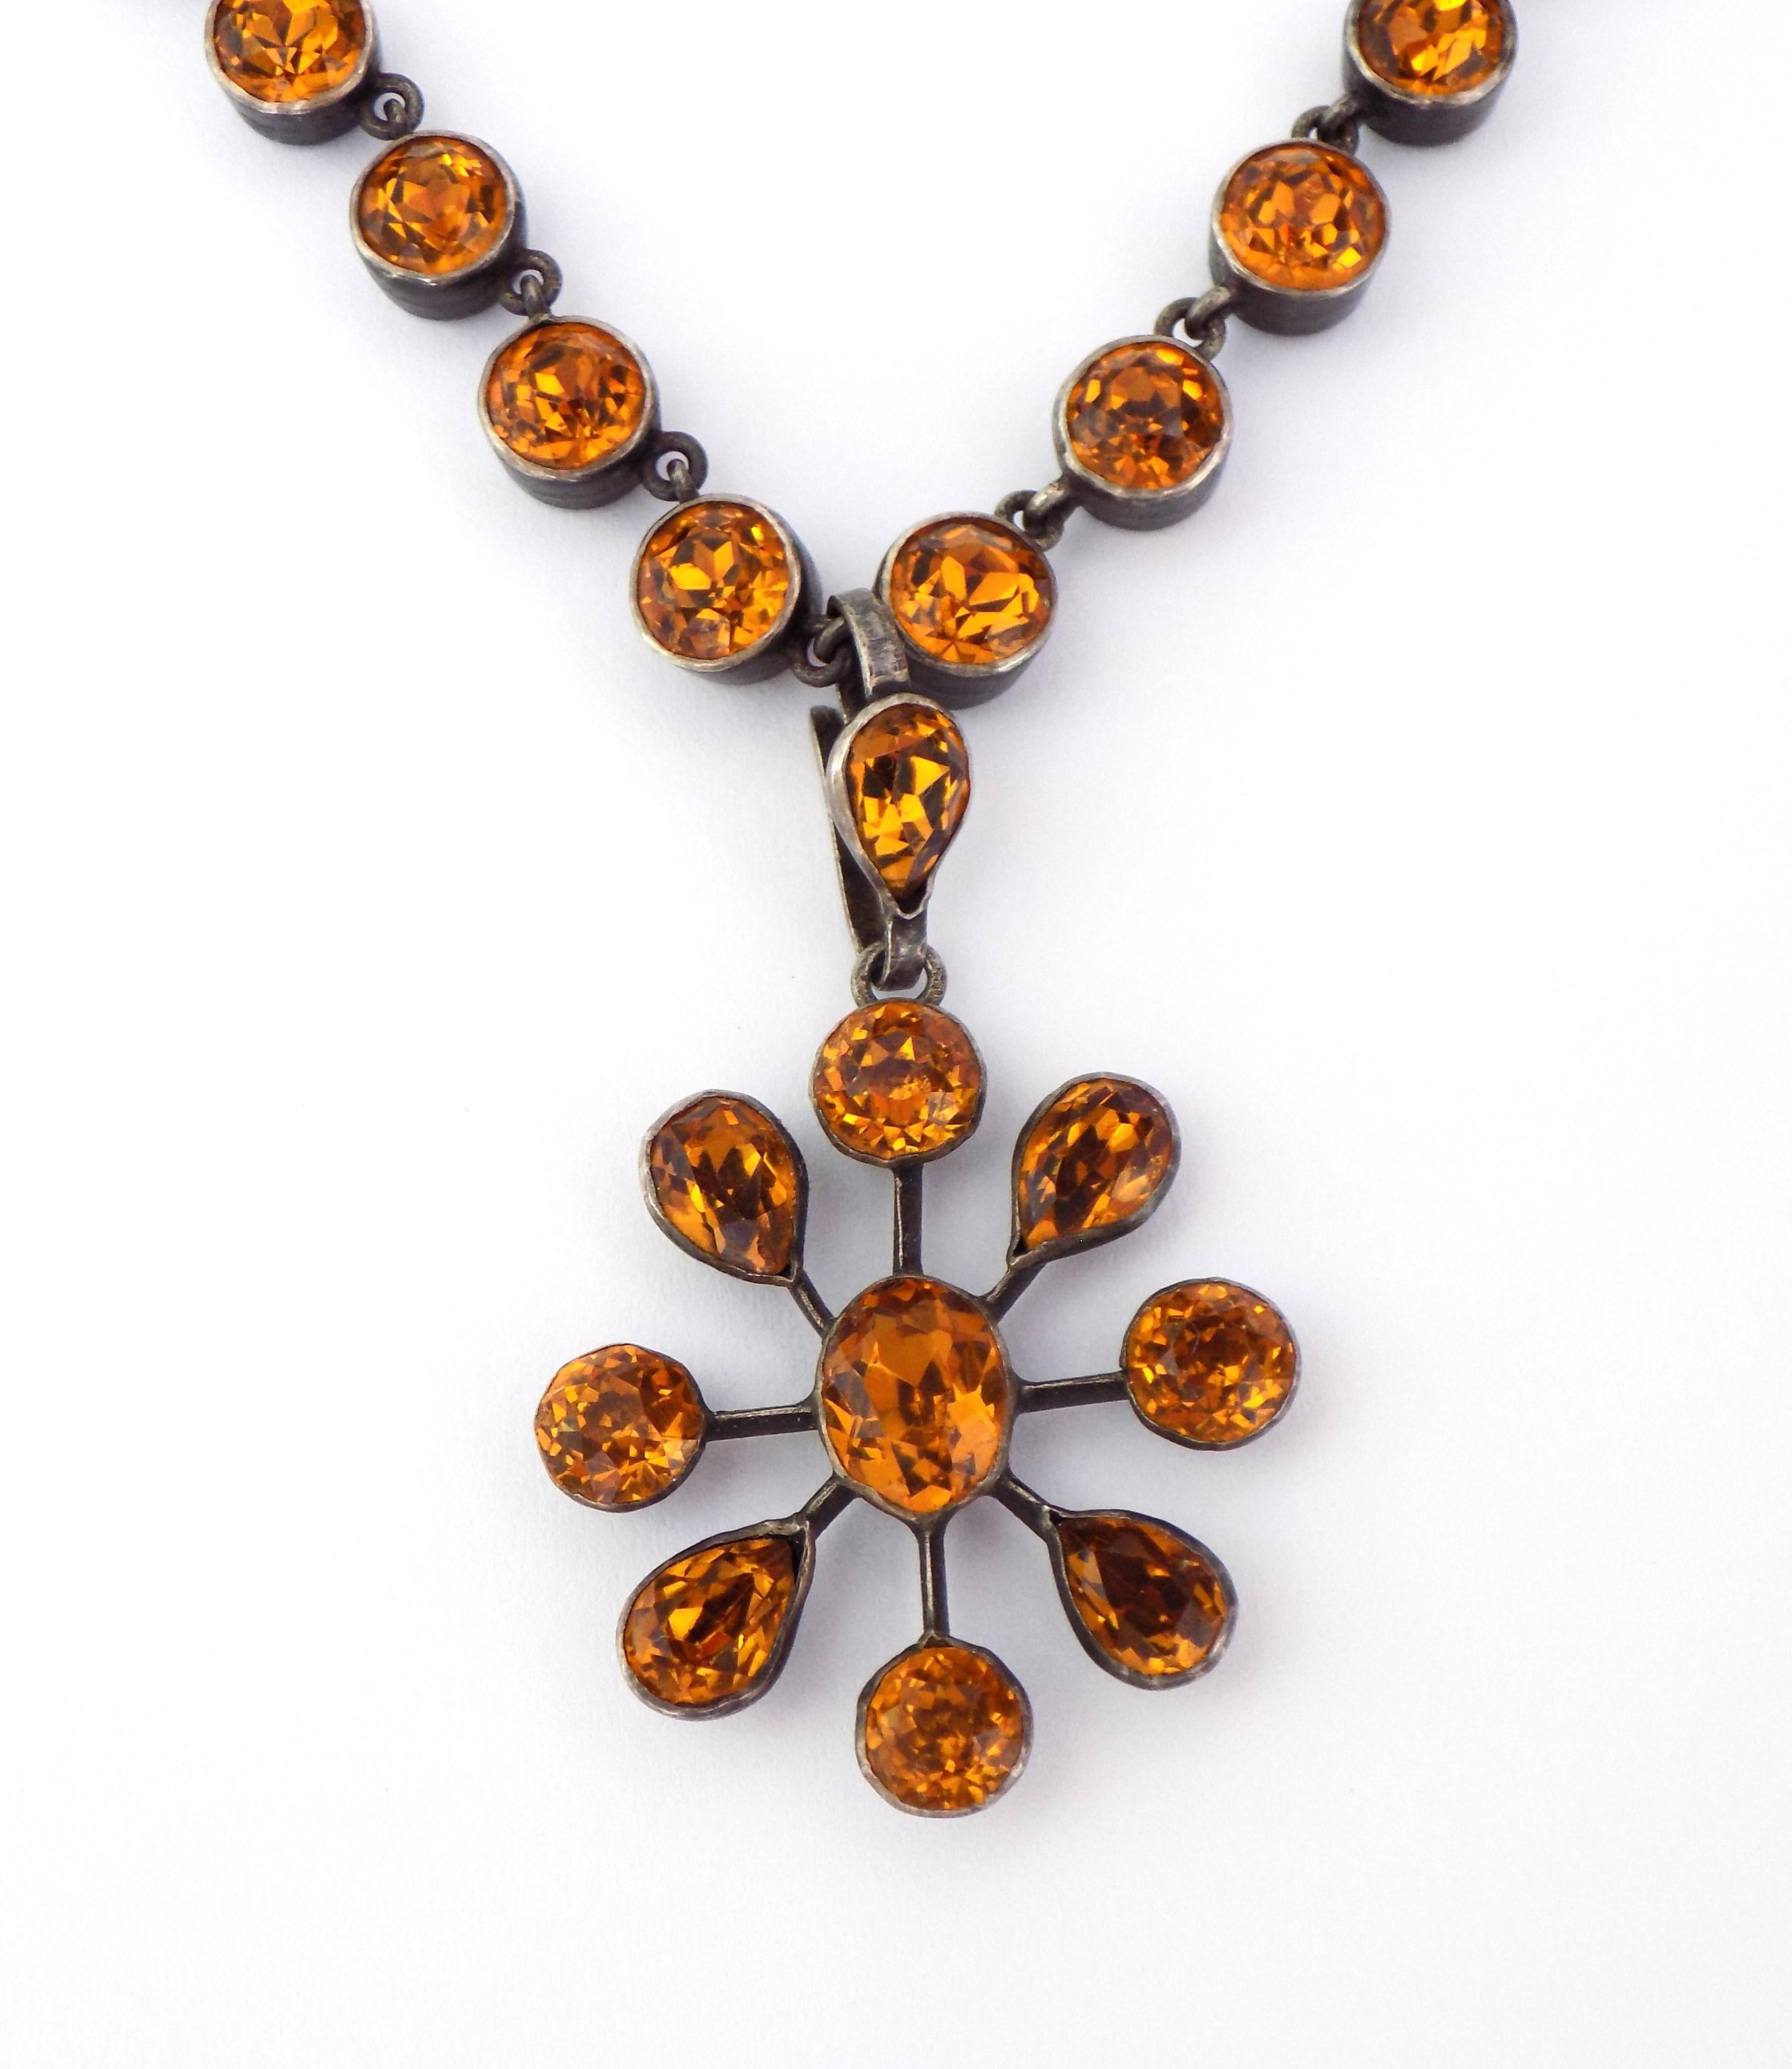 A Stunning Art Deco c. 1920s Silver and Yellow Topaz colour paste (glass) necklace with attached pendant and can be easily removed. The paste stones in closed back setting, the necklace well made. An eye-catching piece of jewellery. Continental